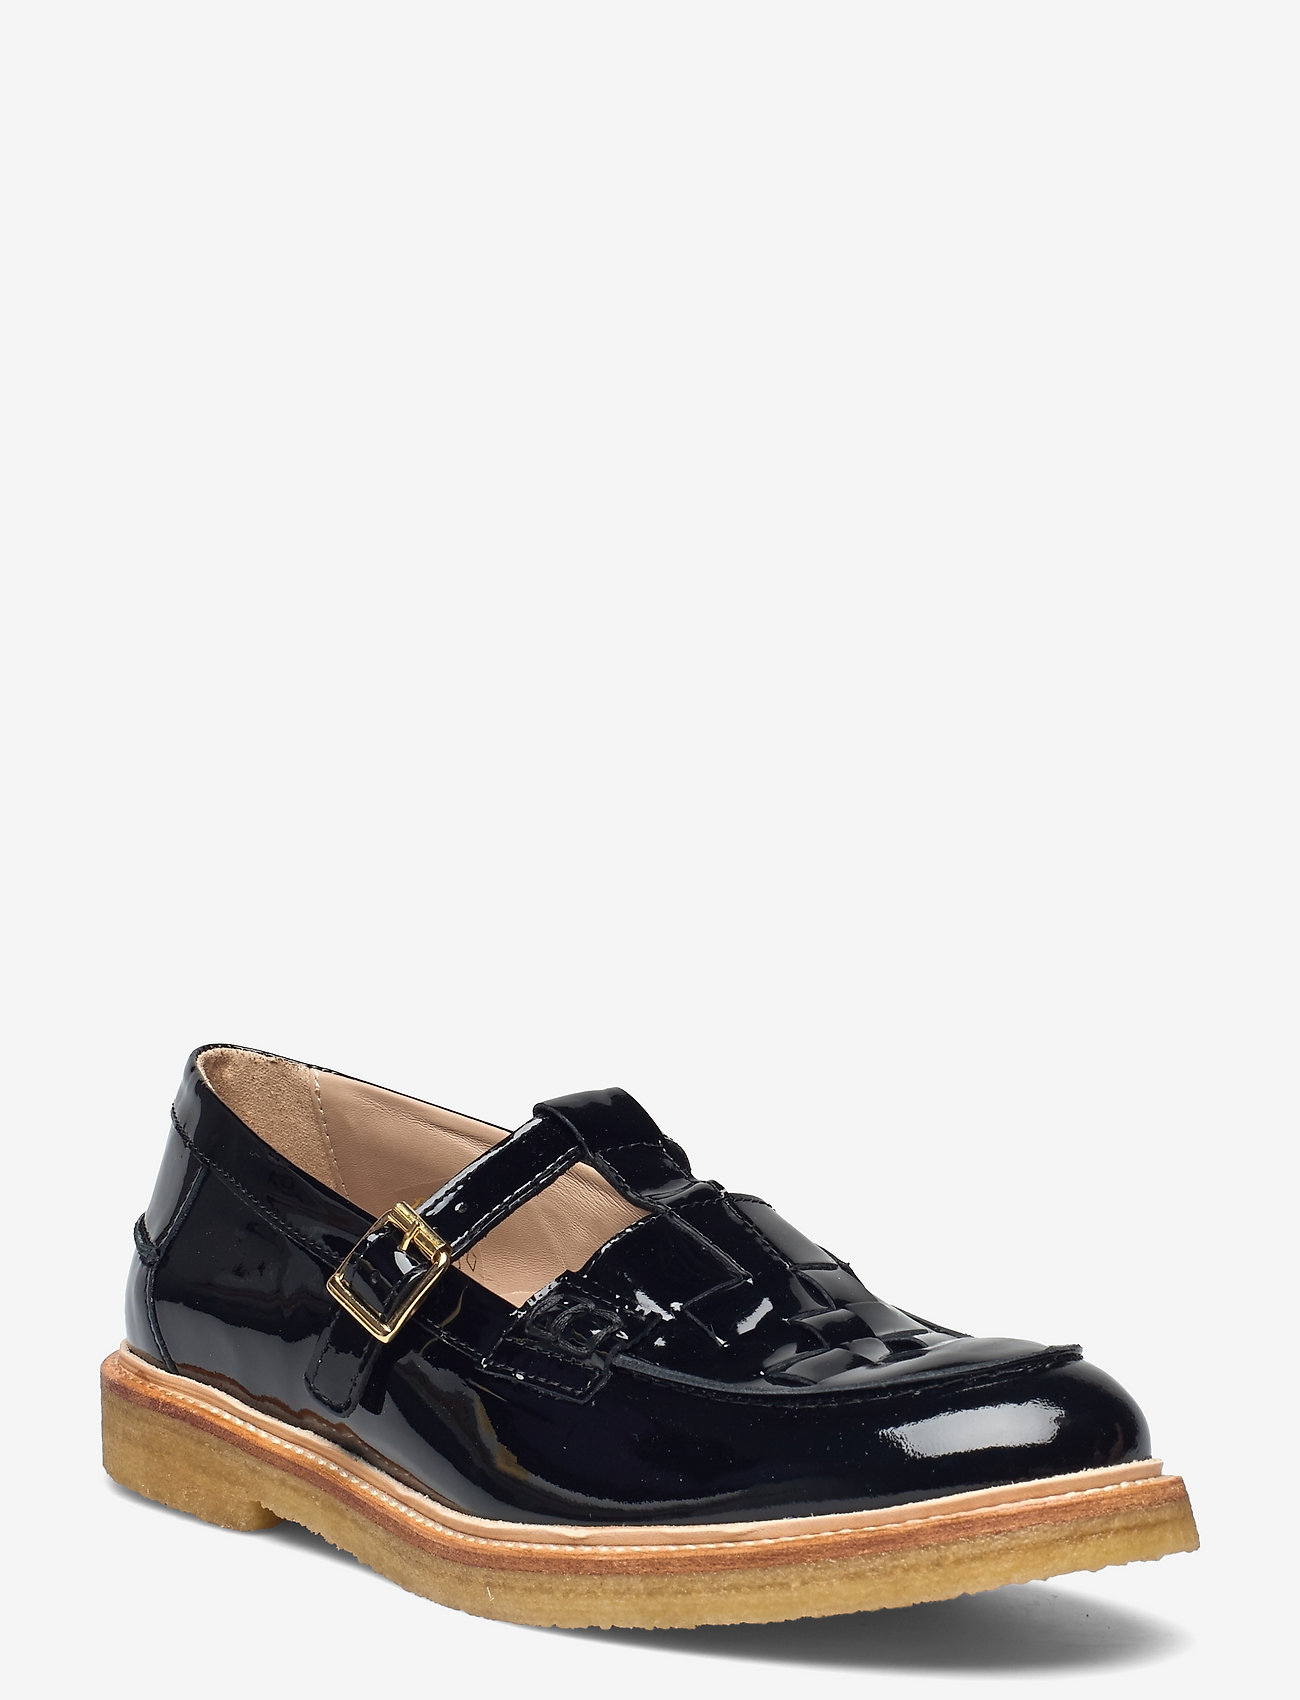 ANGULUS - Shoes - flat - loafers - 2320 black - 0